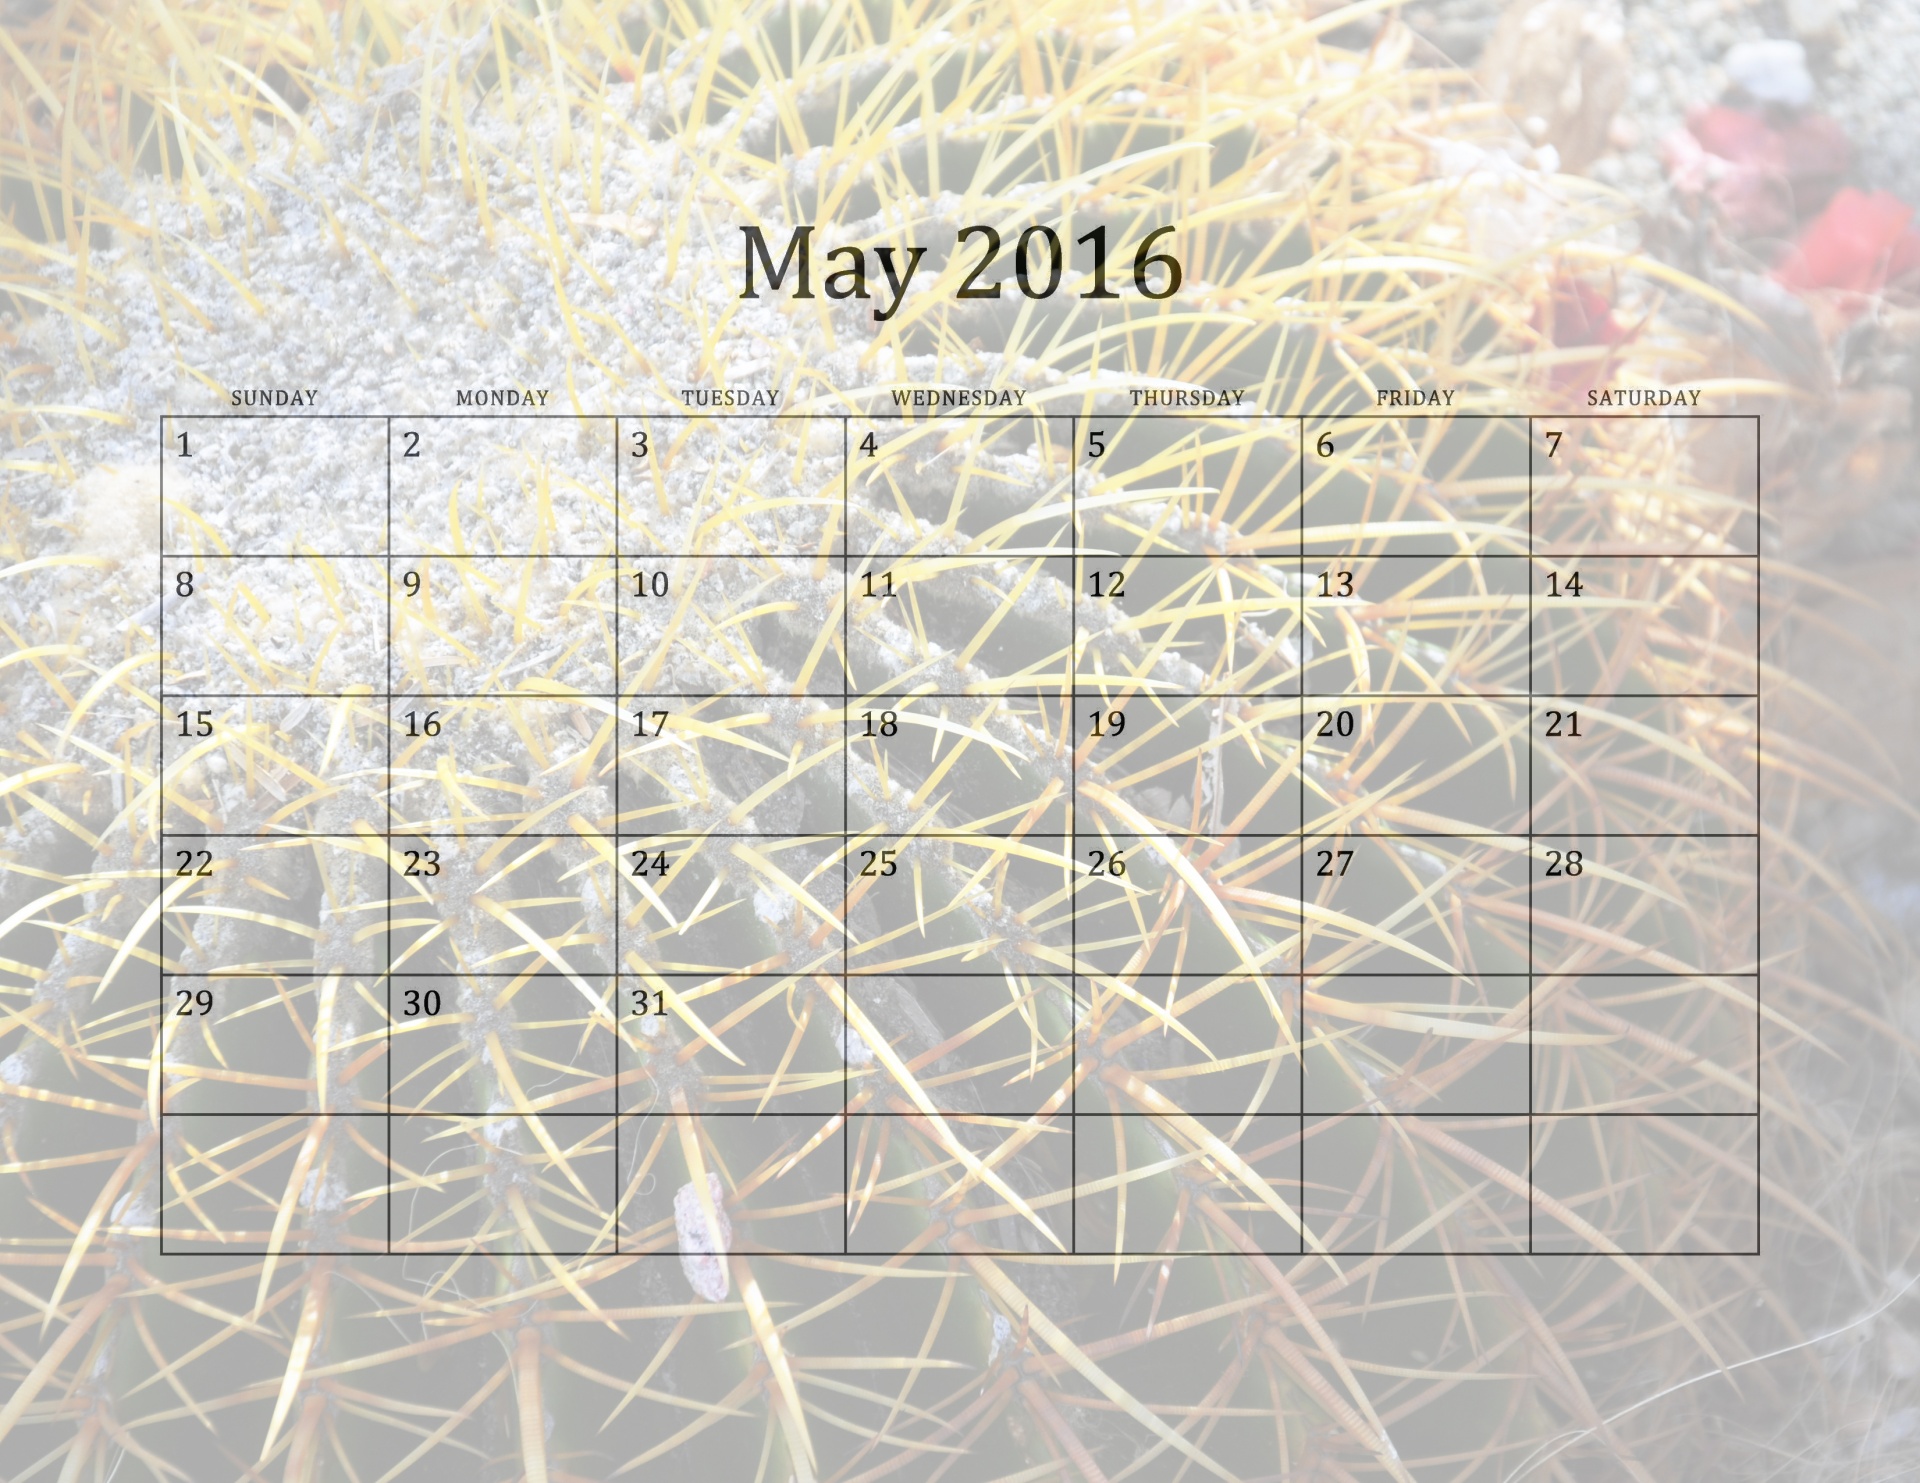 2016-may-monthly-calendar-free-stock-photo-public-domain-pictures